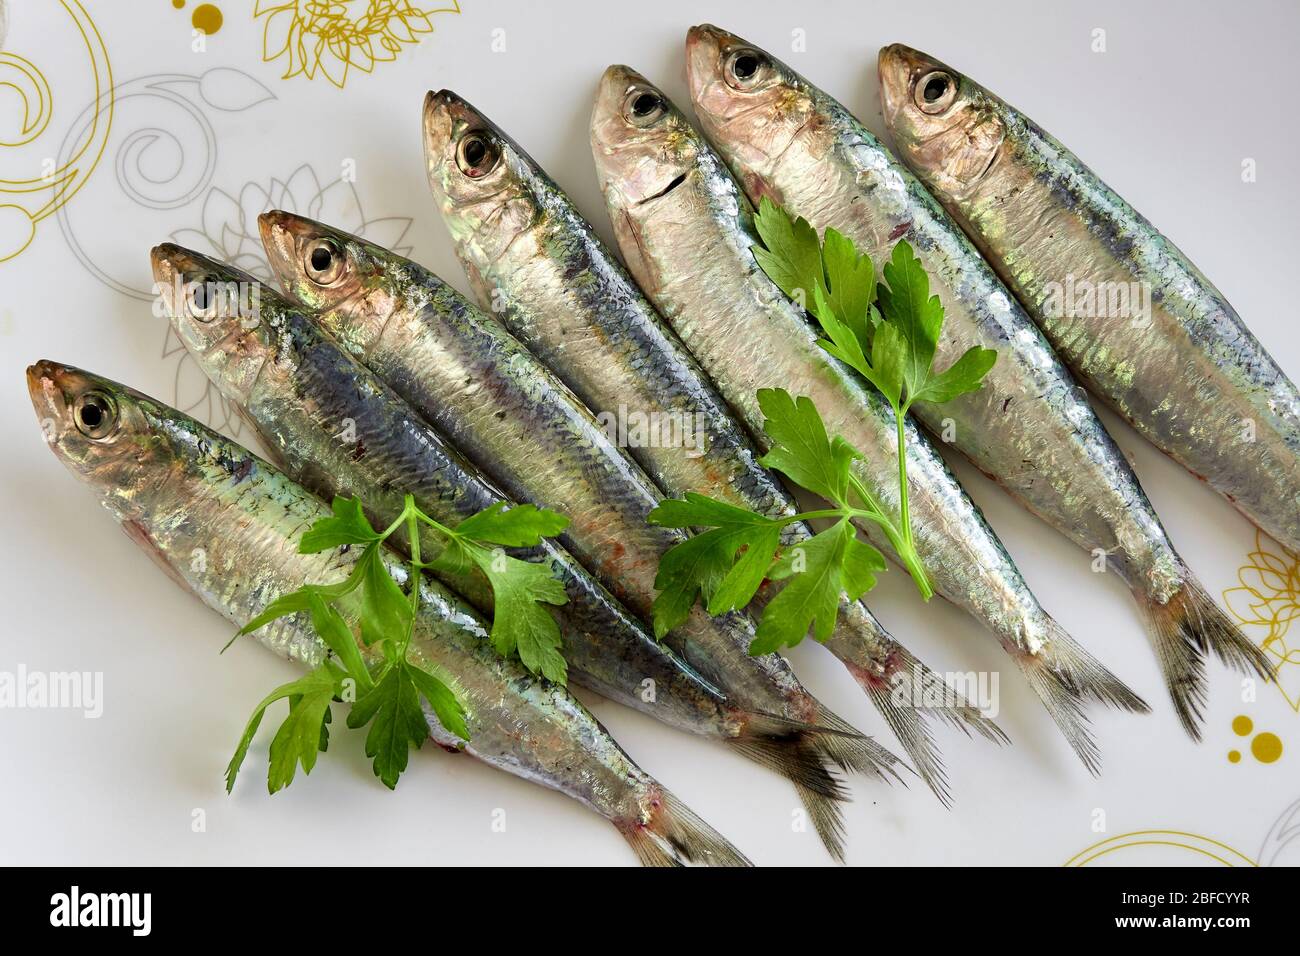 tray with fresh sardines decorated with parsley Stock Photo